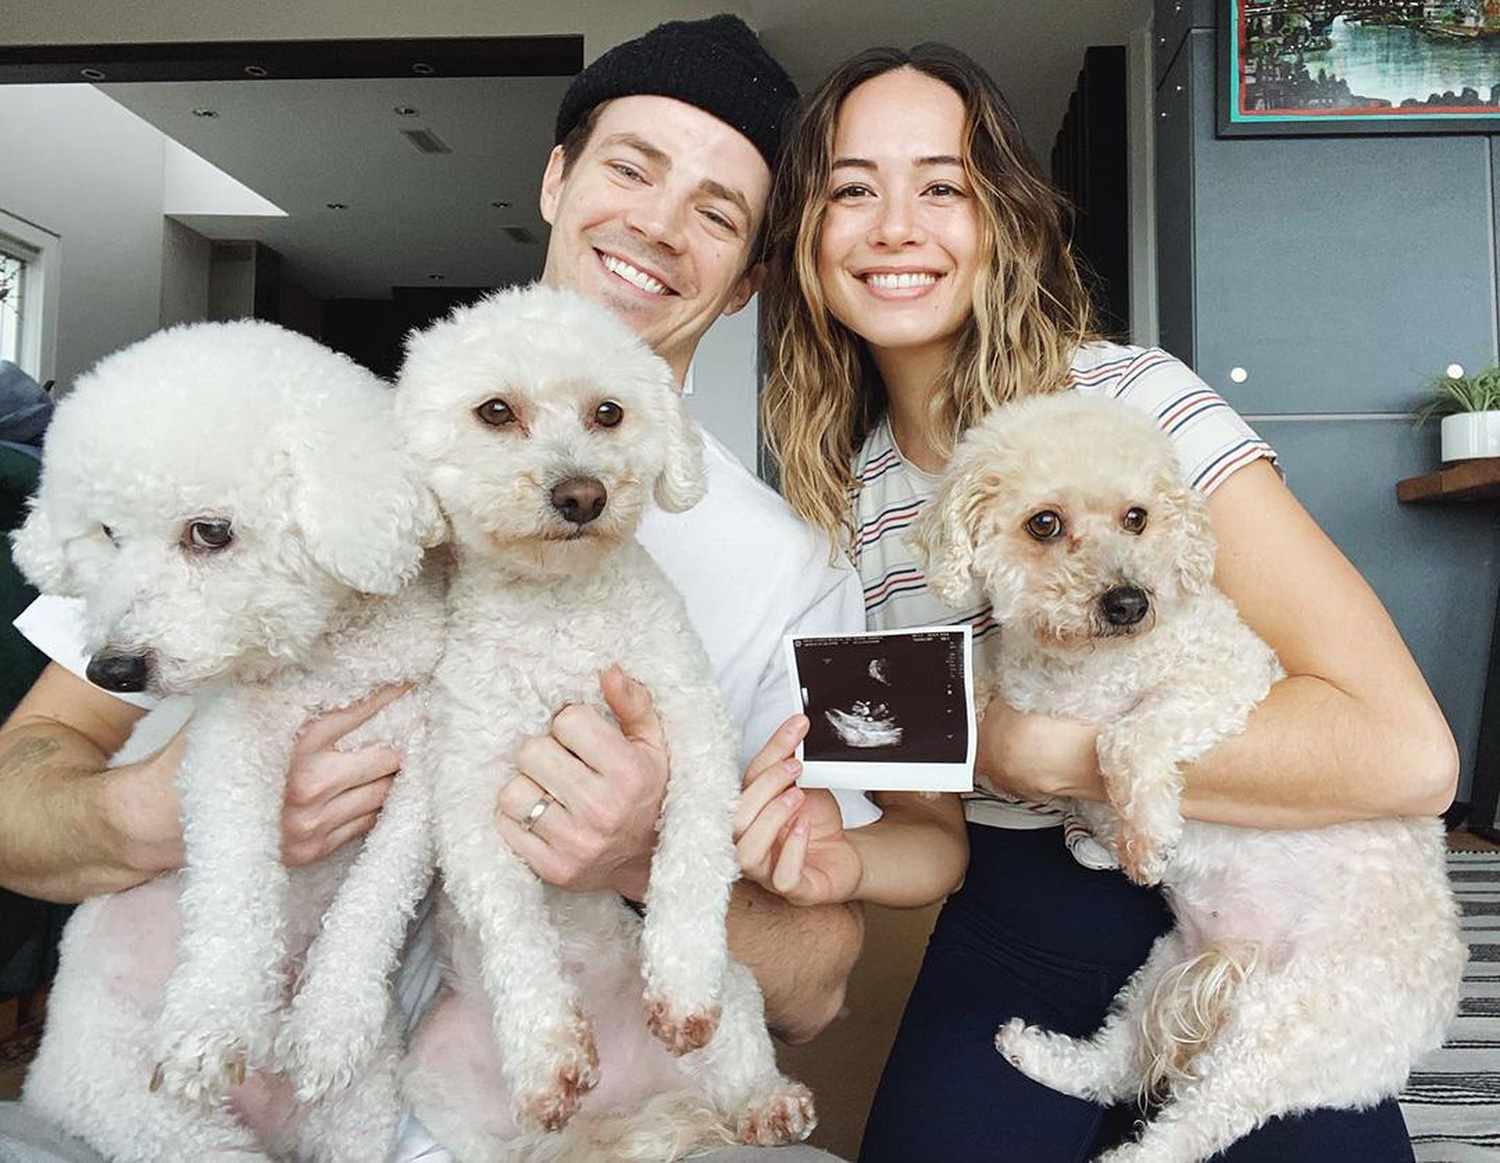 Grant Gustin Expecting Child